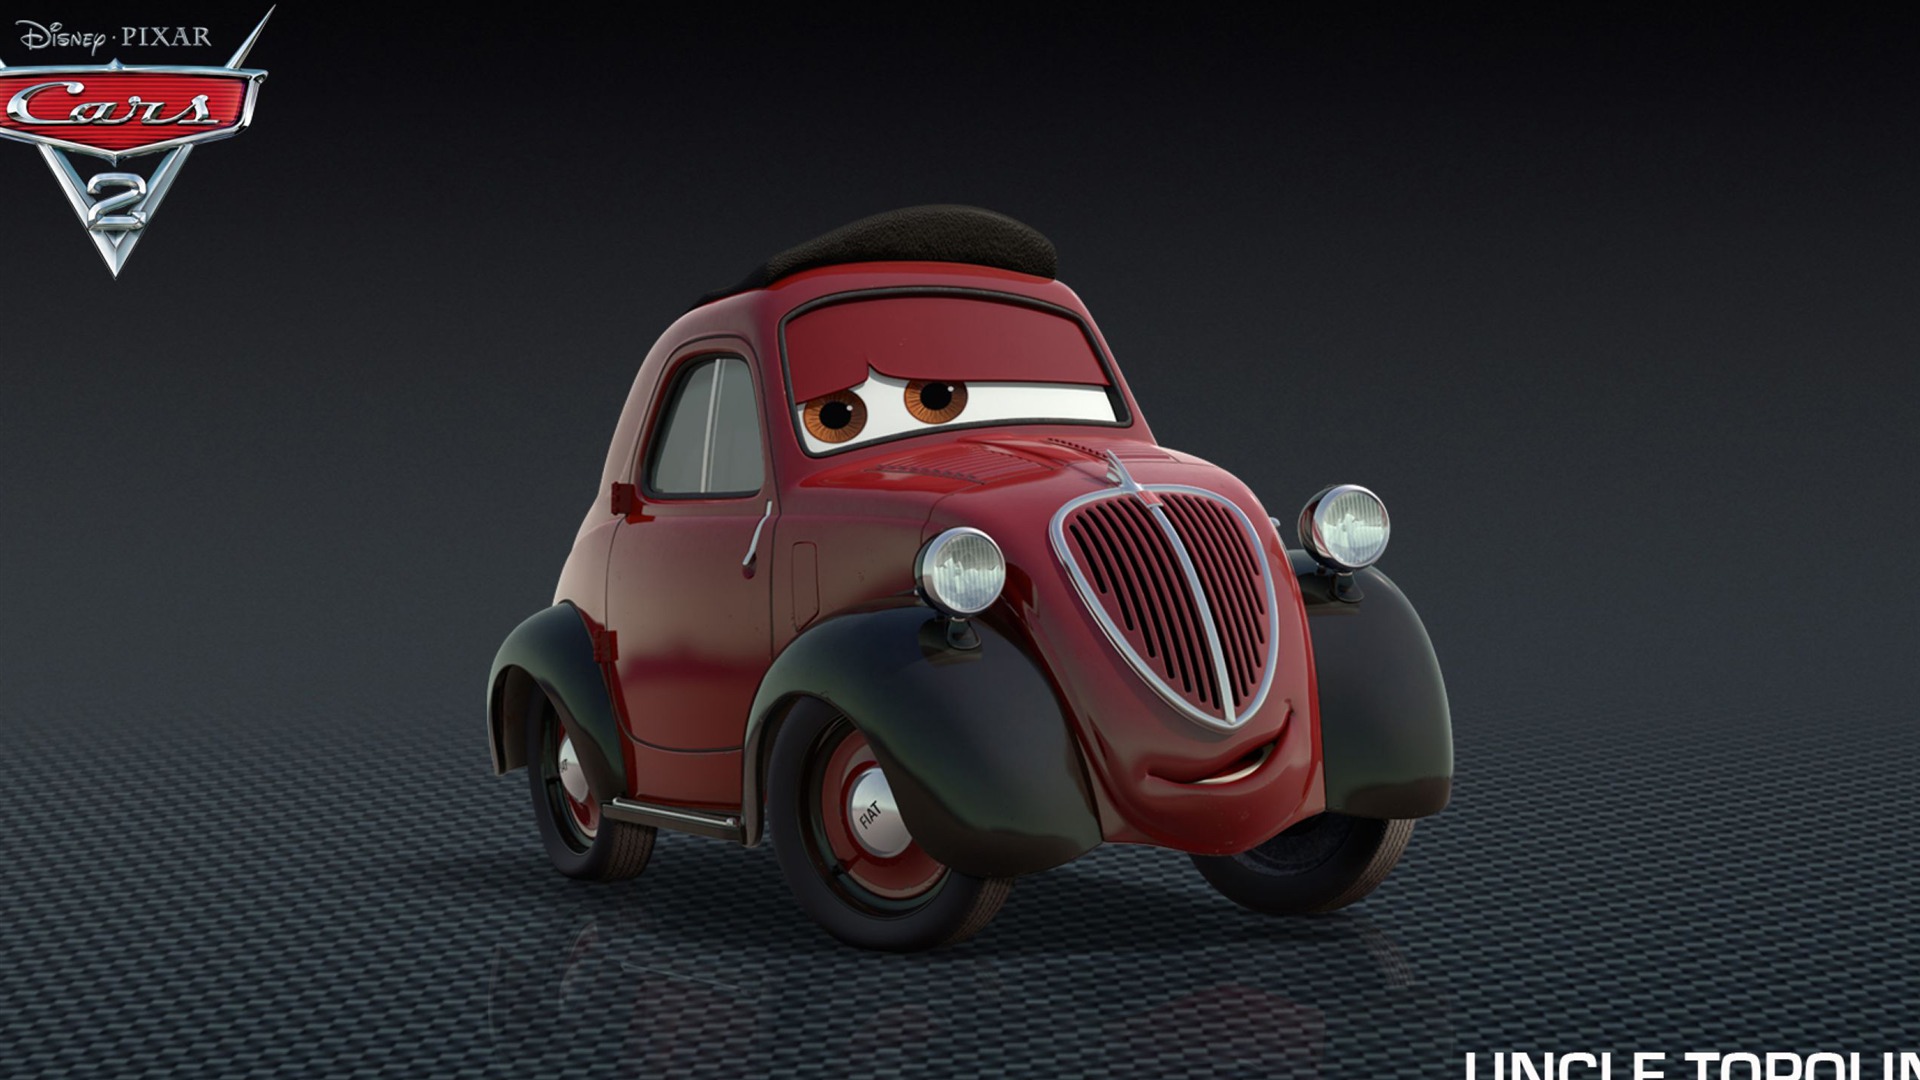 Cars 2 wallpapers #31 - 1920x1080